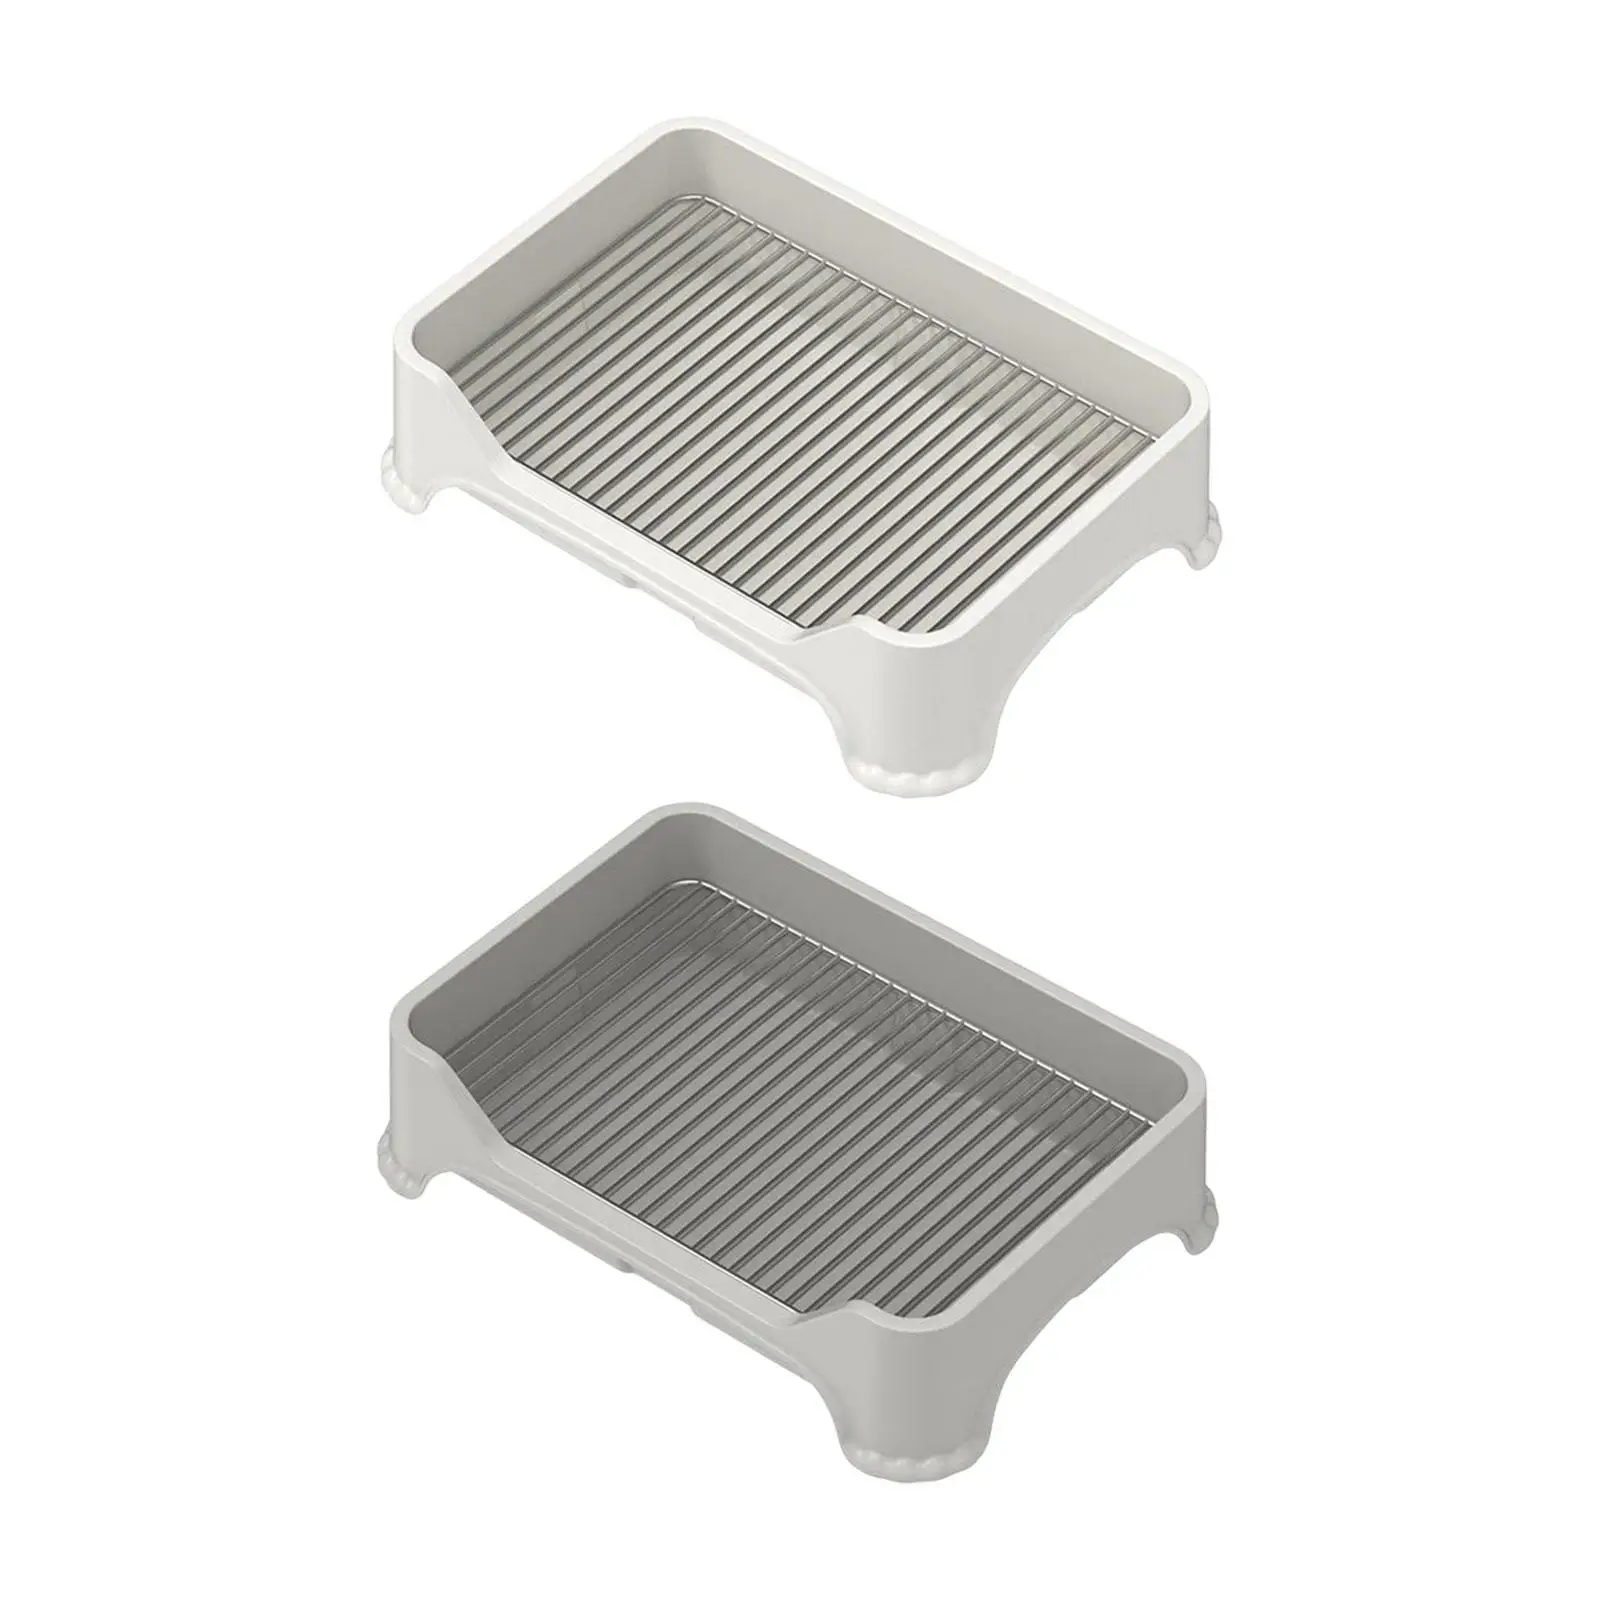 Pet Dog Toilet Outdoor Anti Splashing Dog Potty Tray Cleaning Tool Pet Litter Pan Litter Box Training Potty Tray Accessories